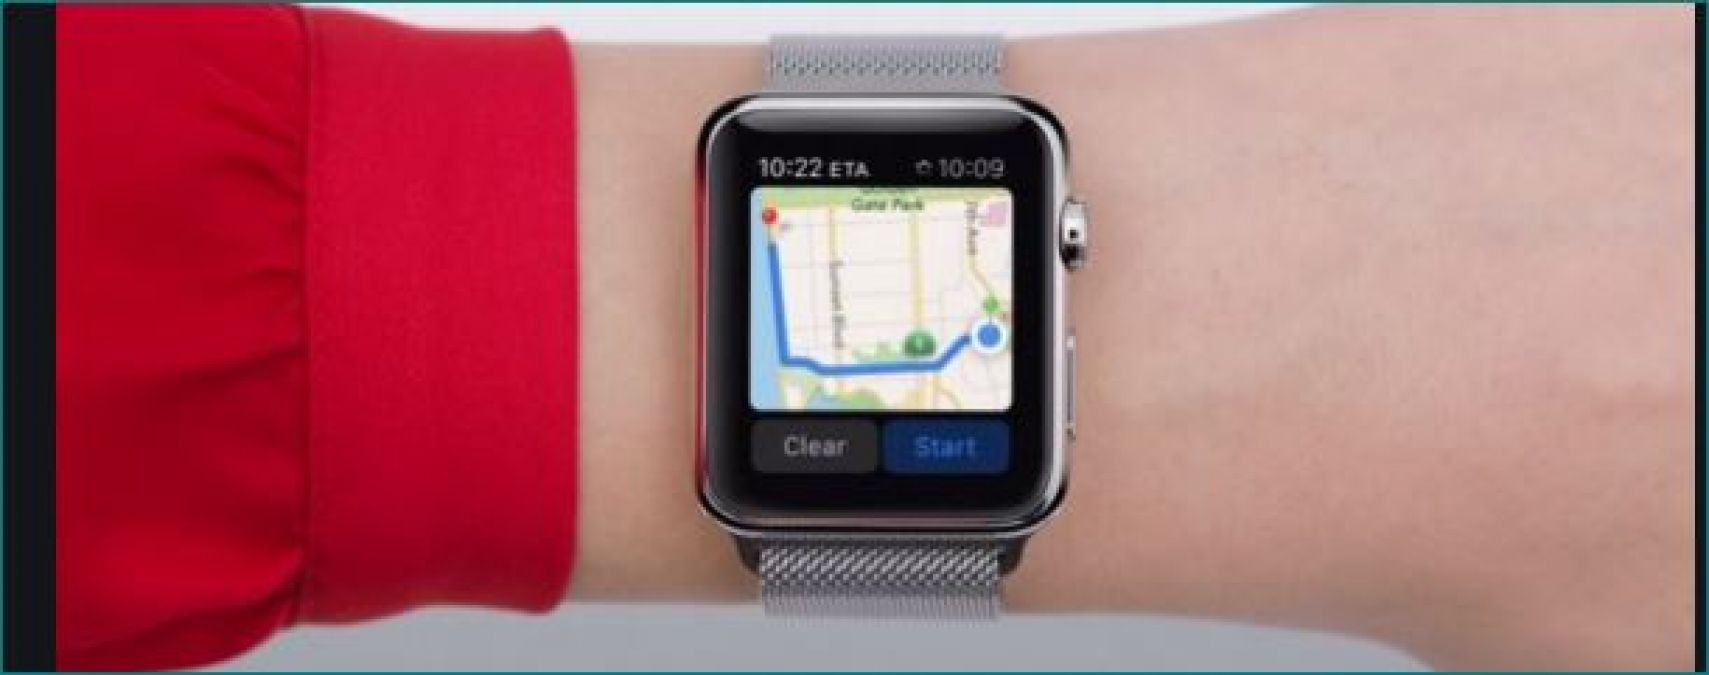 Google re-introduces Google Maps for Apple Watch